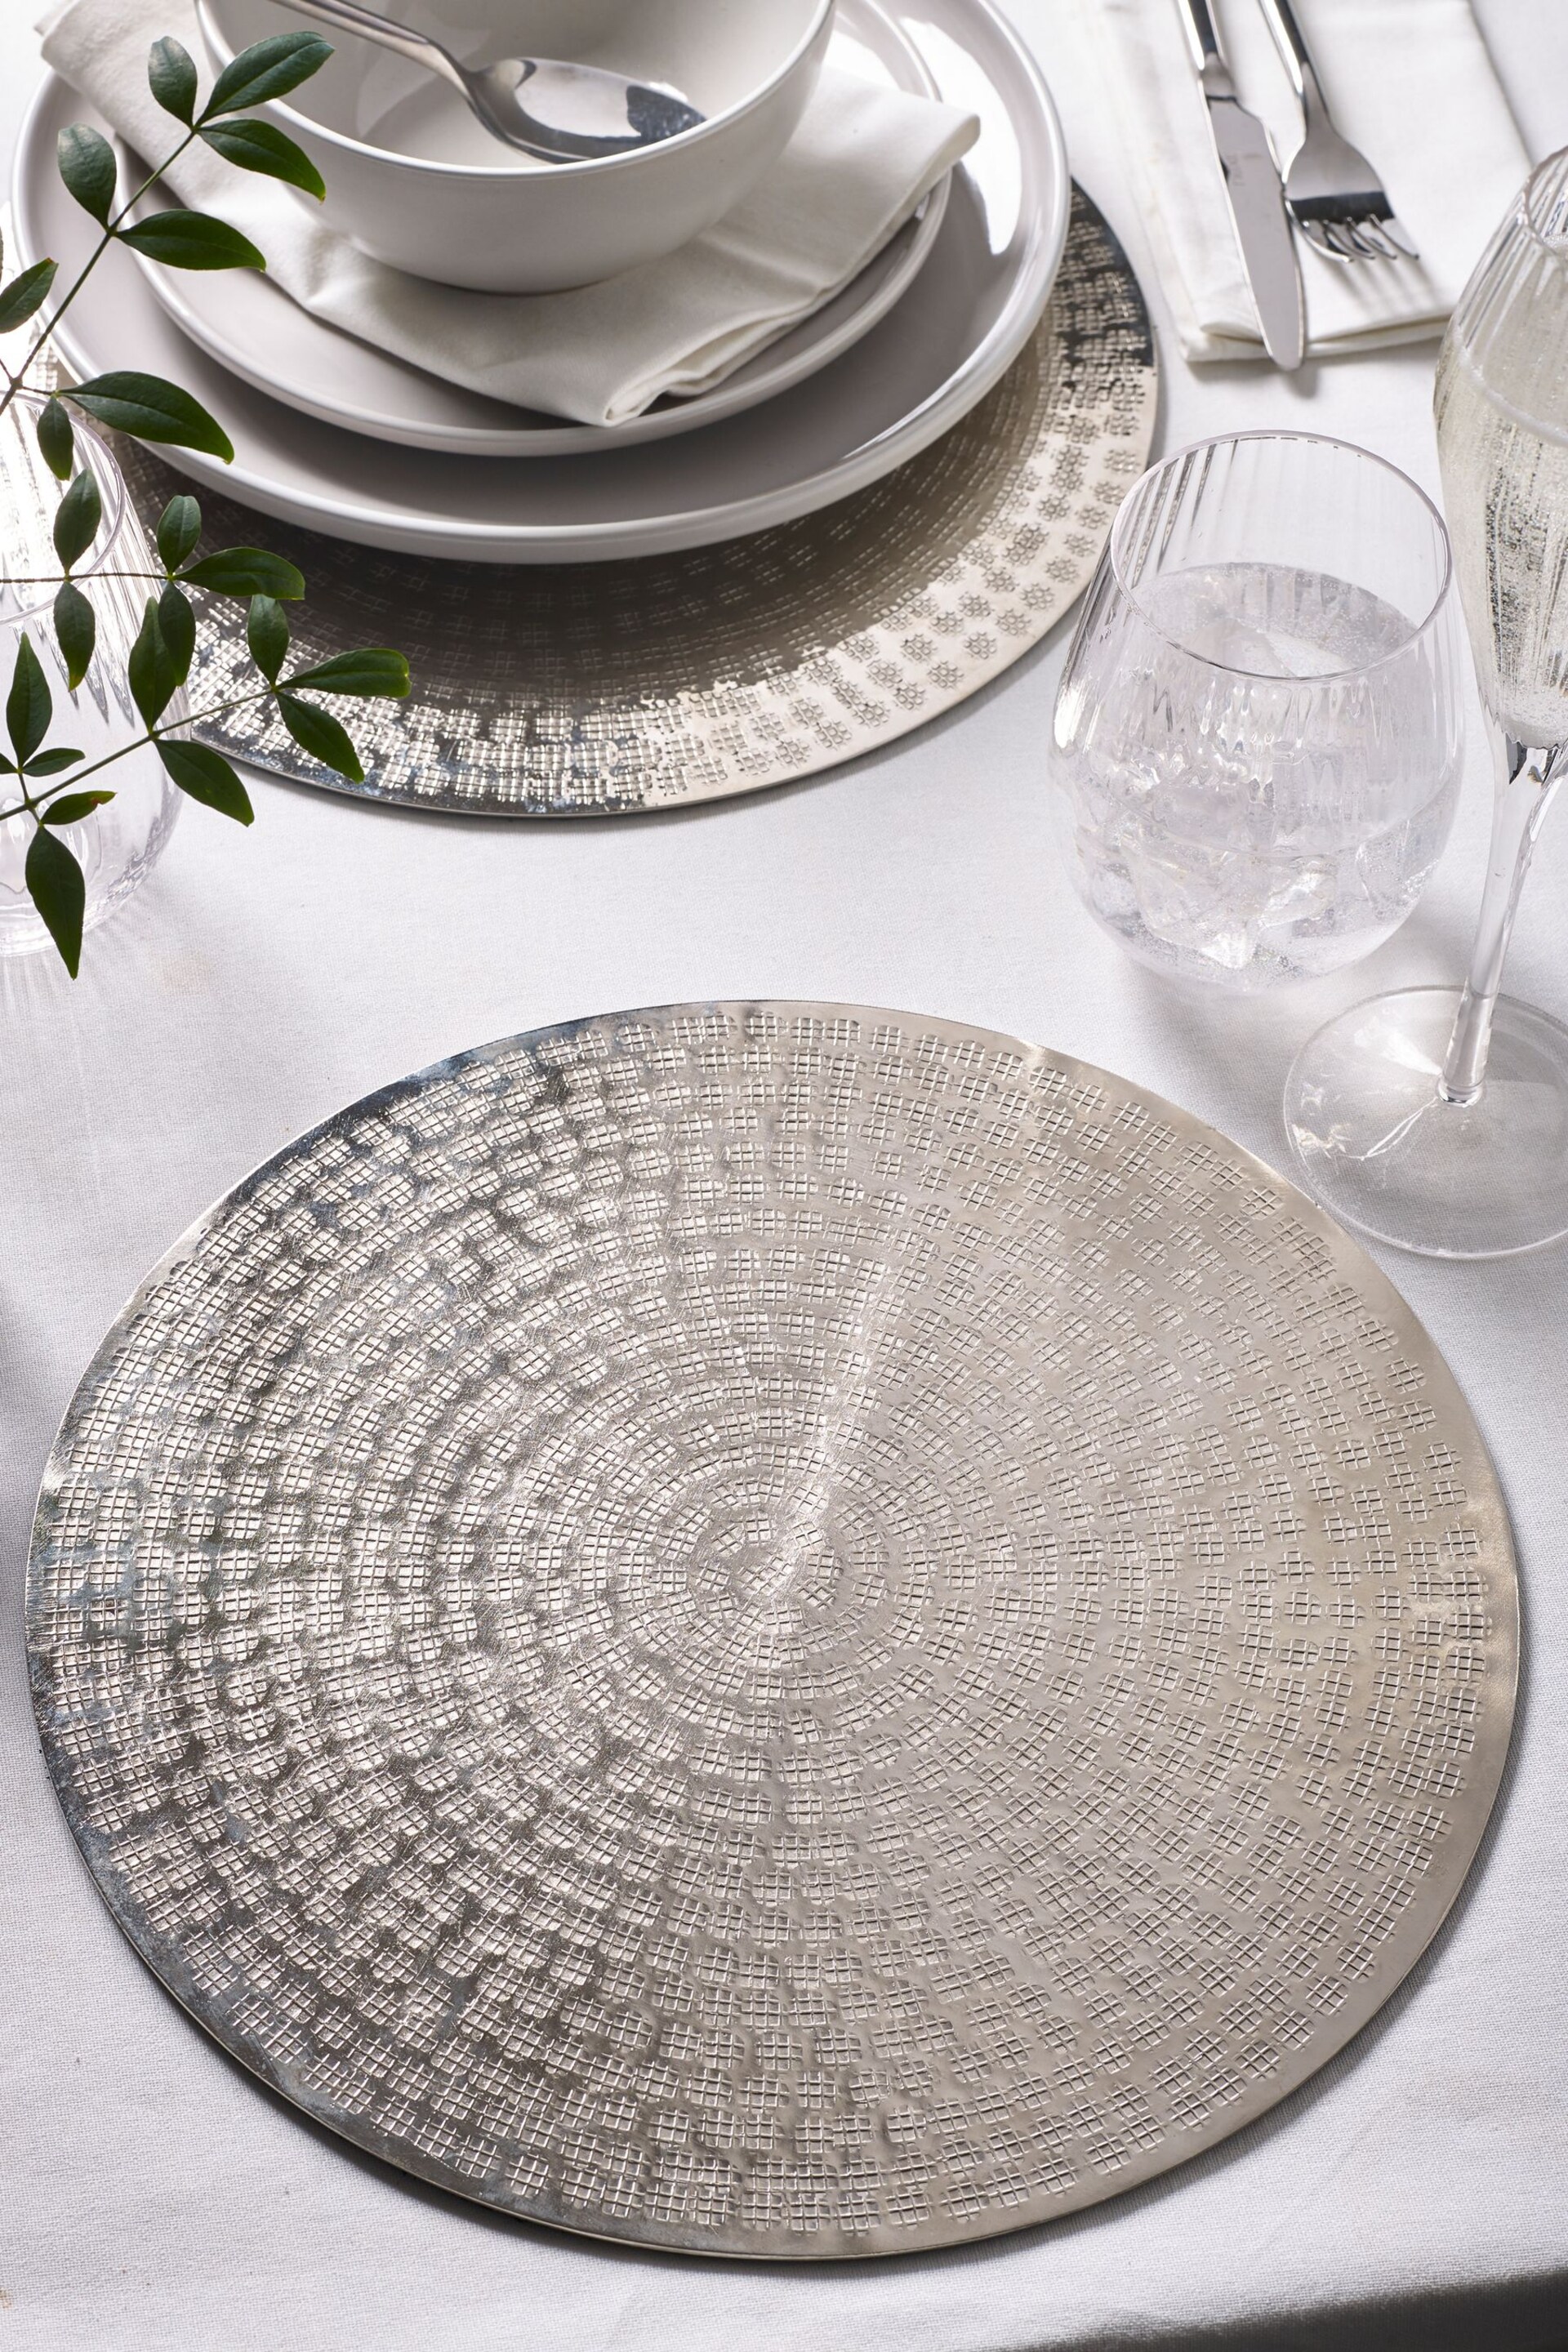 Silver Hammered Metal Placemats and Coasters Set of 2 Placemats - Image 1 of 4